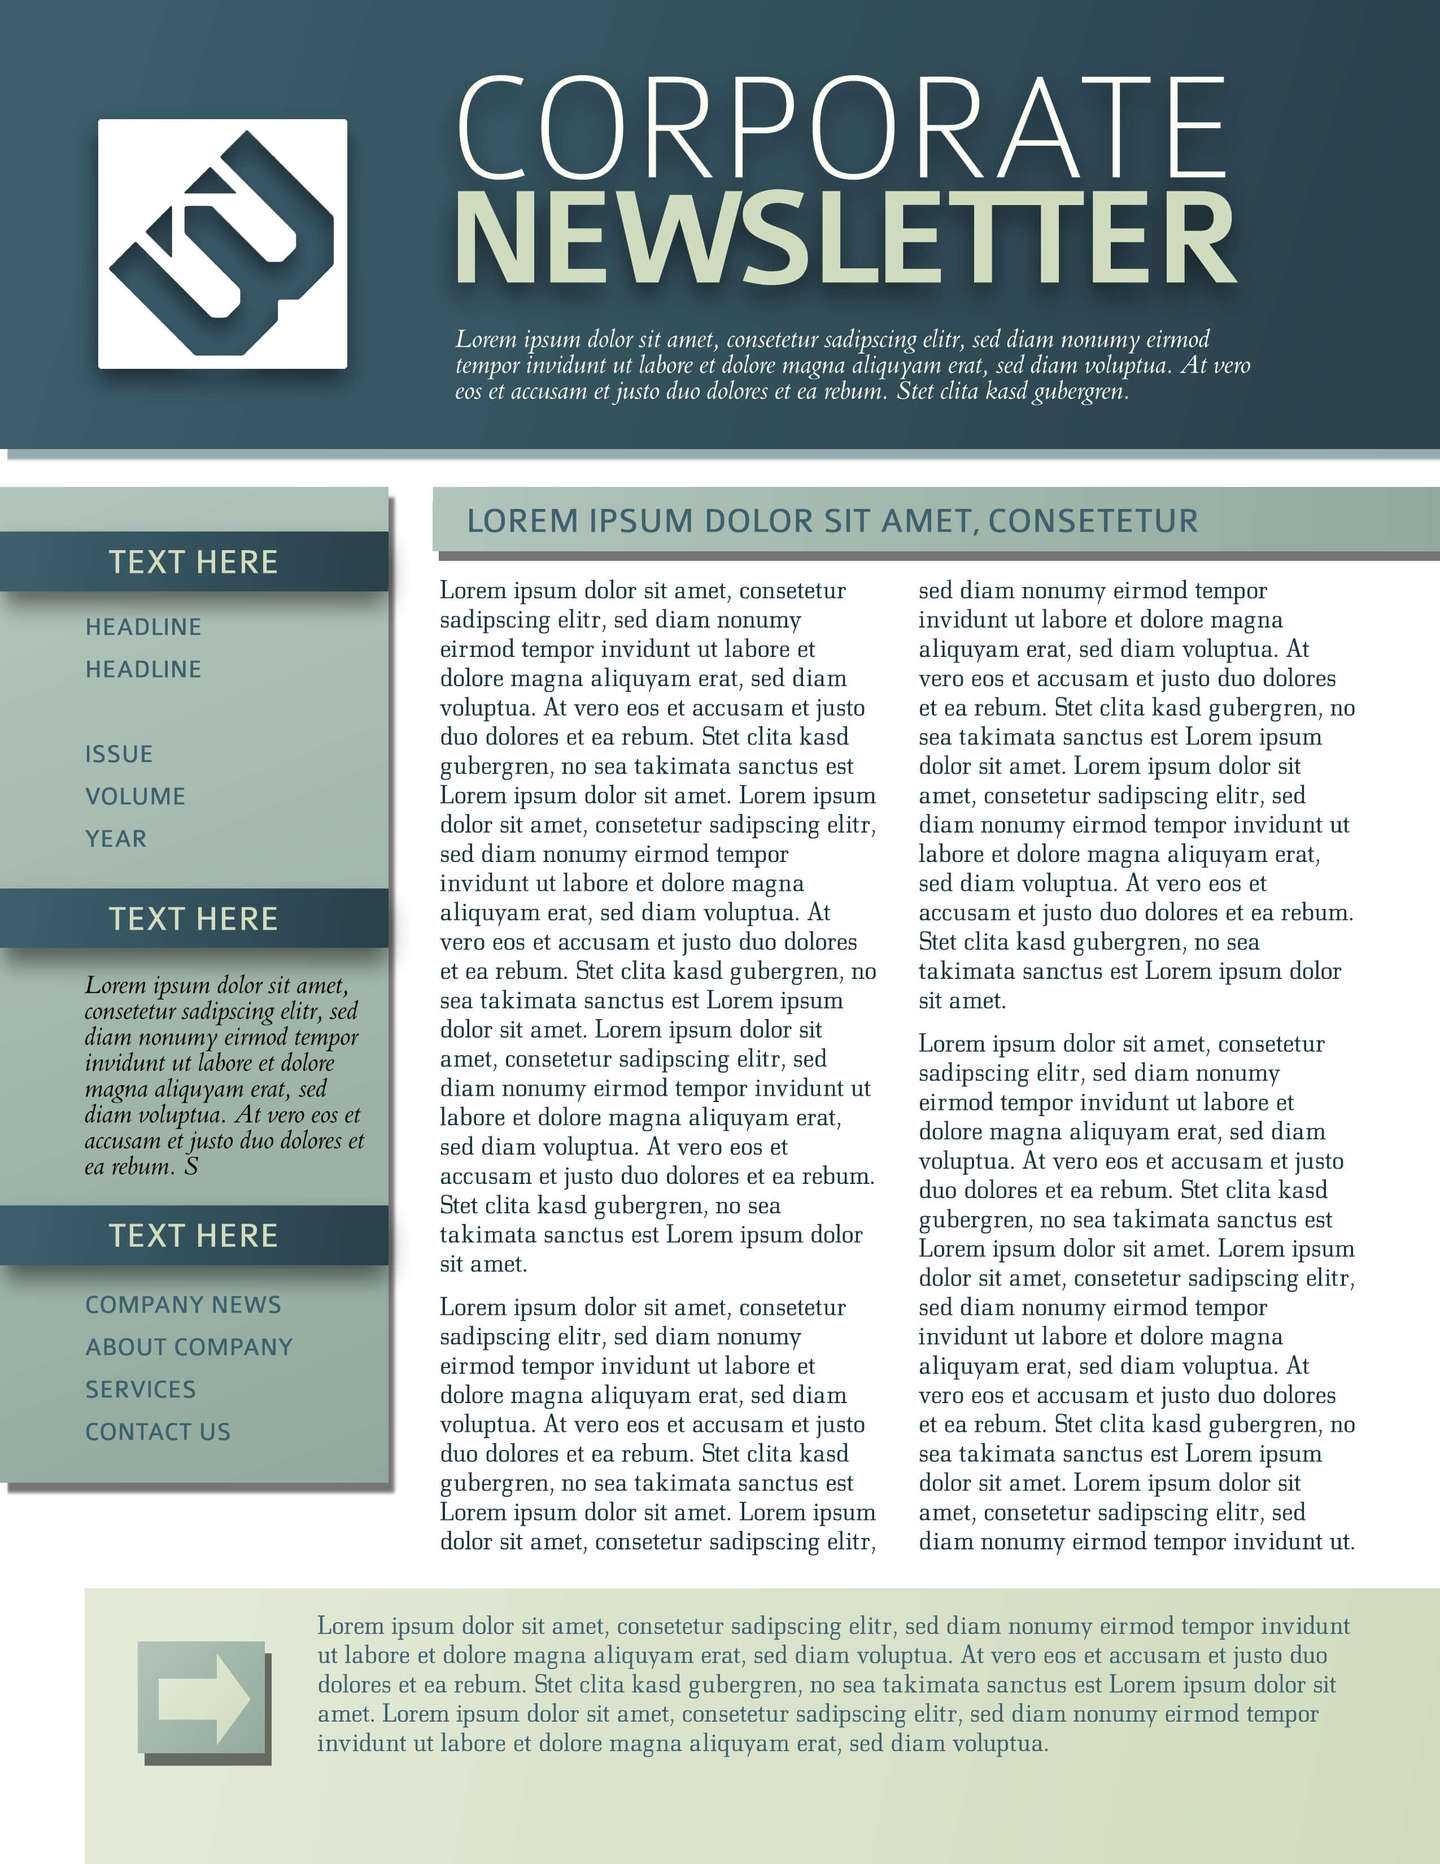 Free Printable Newsletter Templates & Examples | Lucidpress Intended For Employee Newsletter Templates